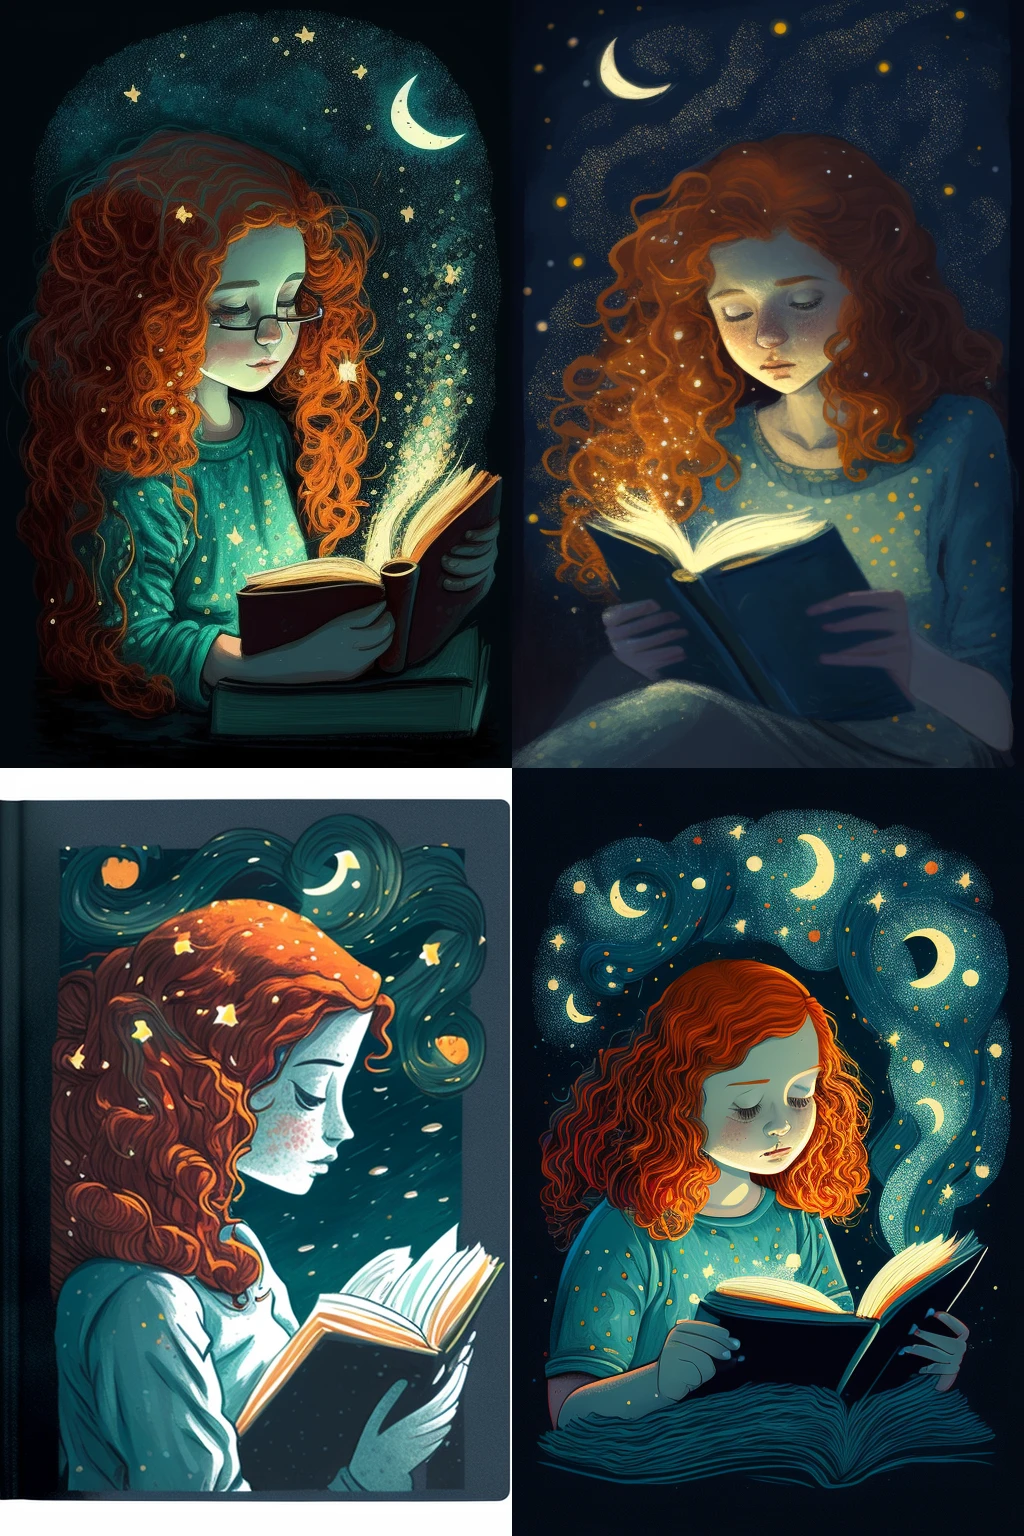 (c)_joana_arapi_a_girl_with_red_curly_hair_reading_a_book_on_a_s_6480c47b-9c78-47f4-a83f-c27e5d342d3d